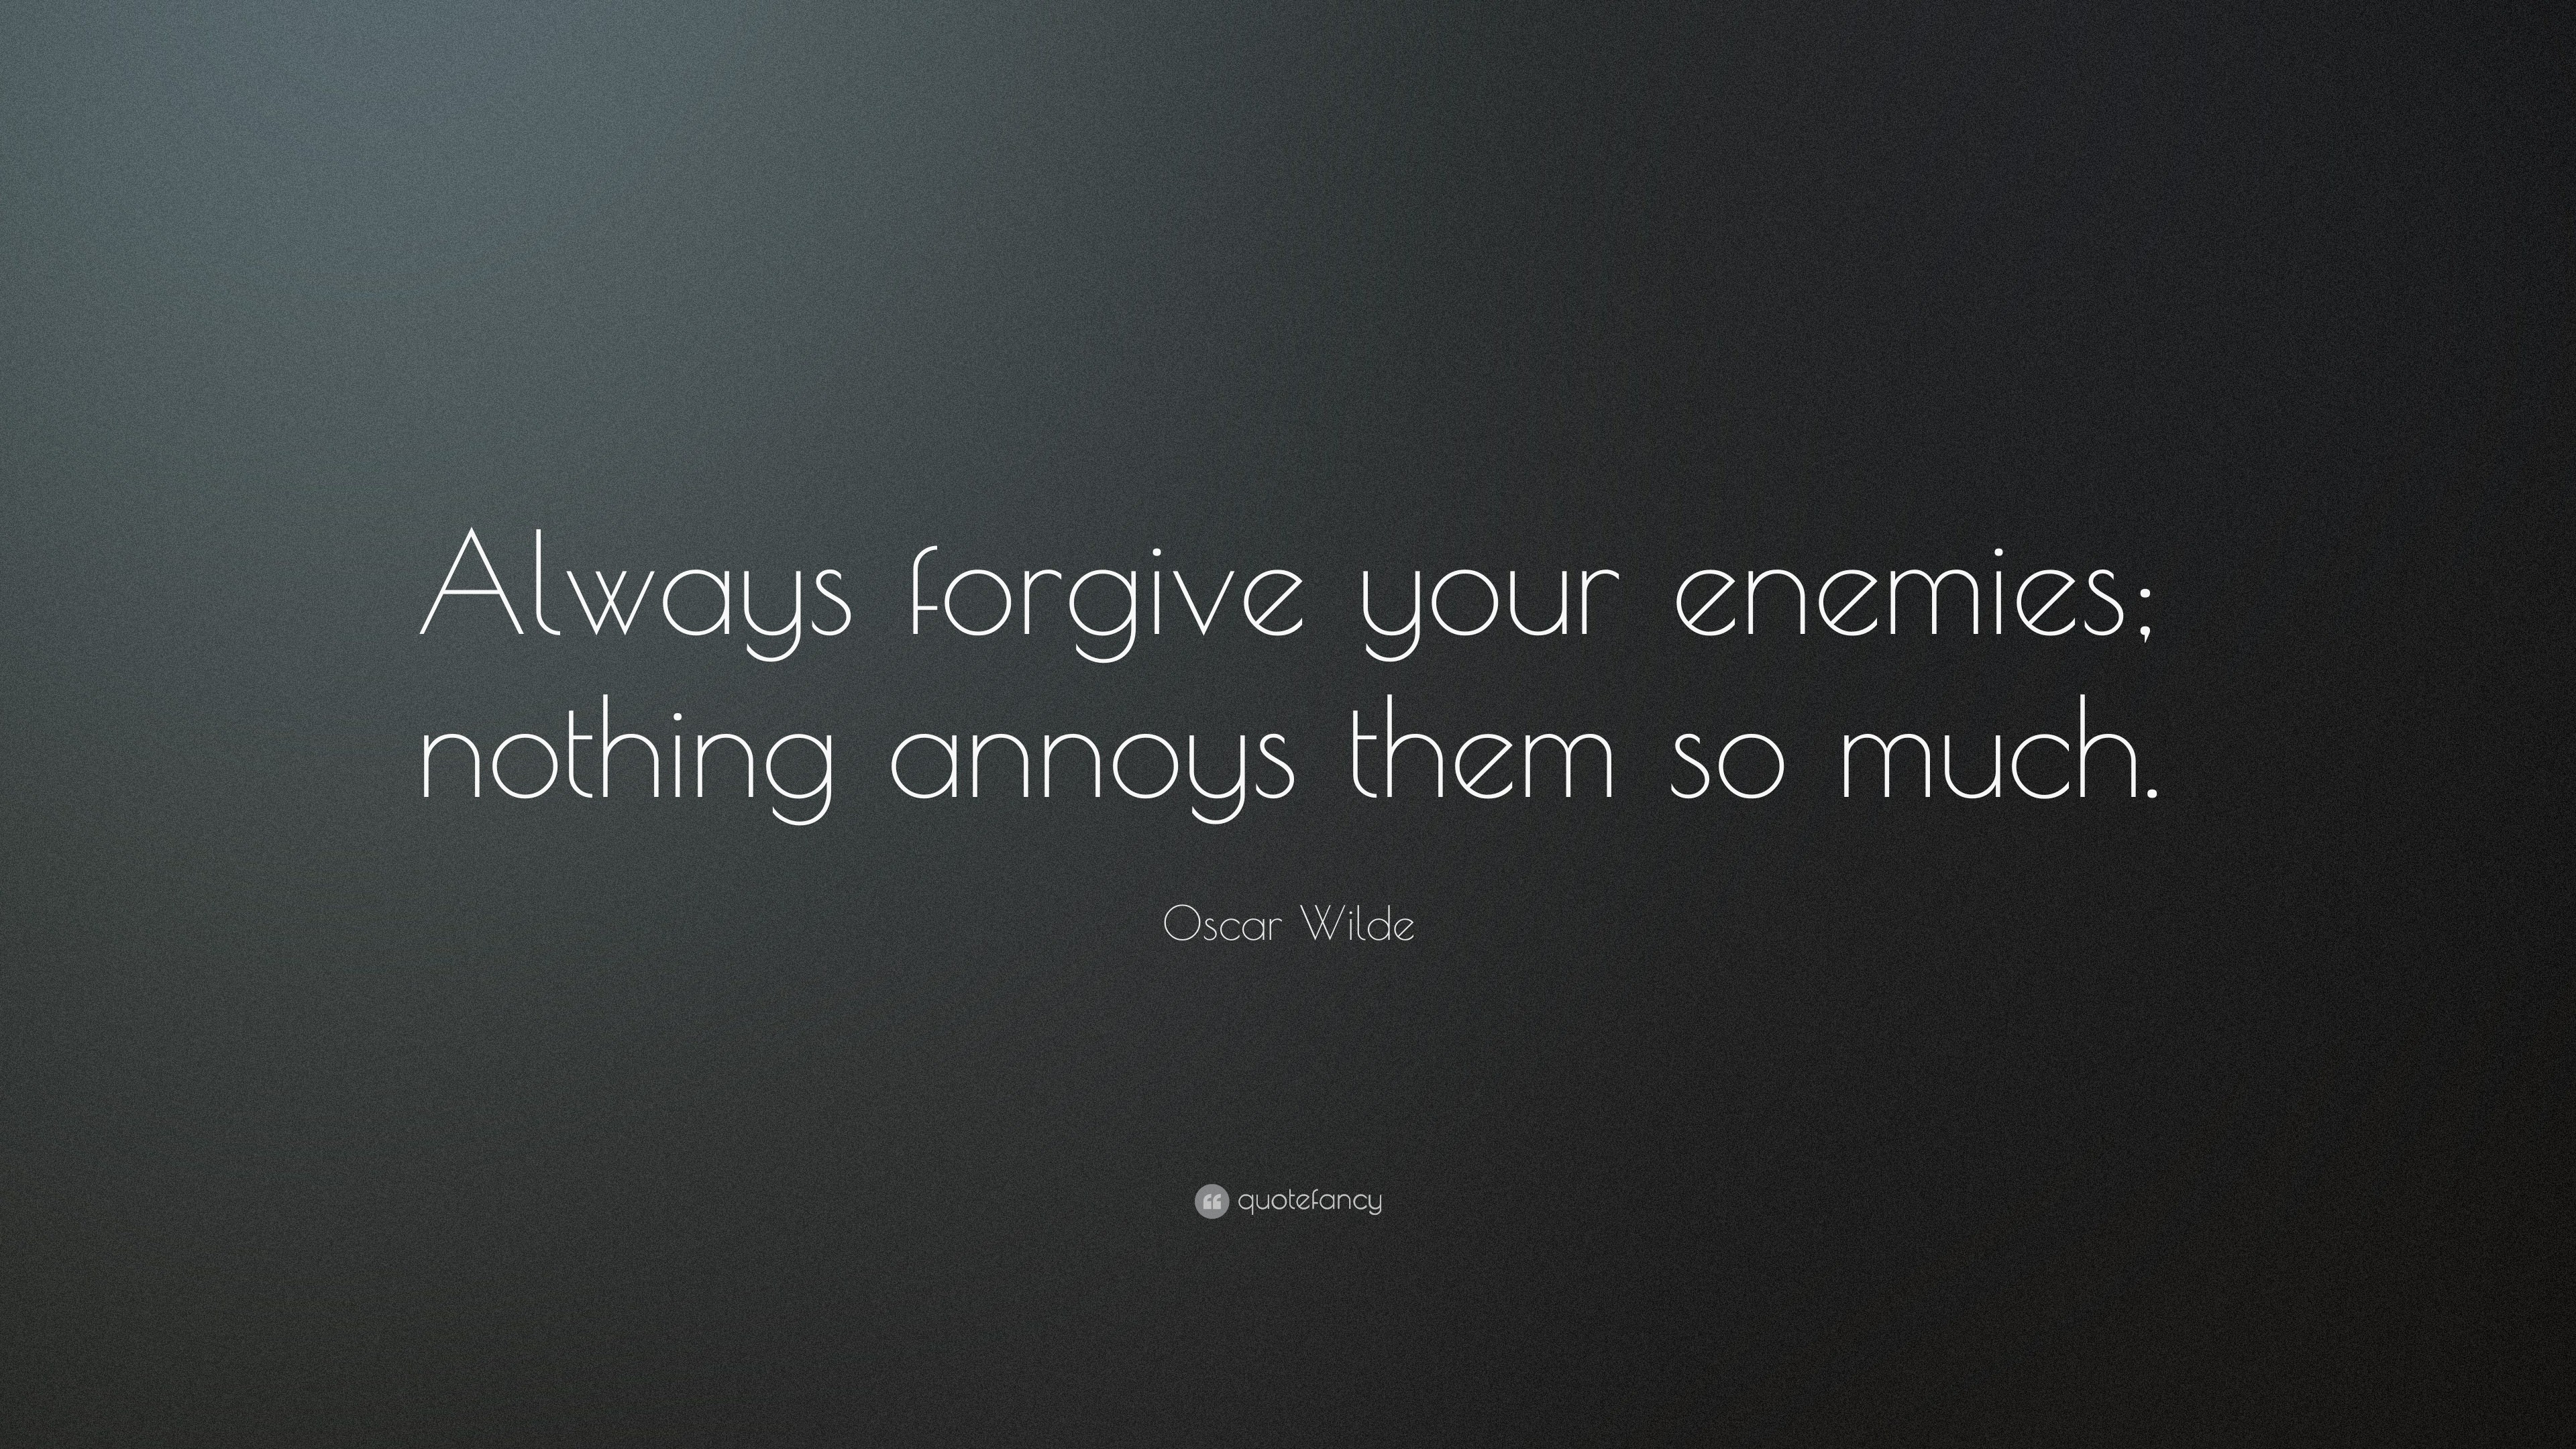 3840x2160 Funny Quotes: “Always forgive your enemies; nothing annoys them so much.”